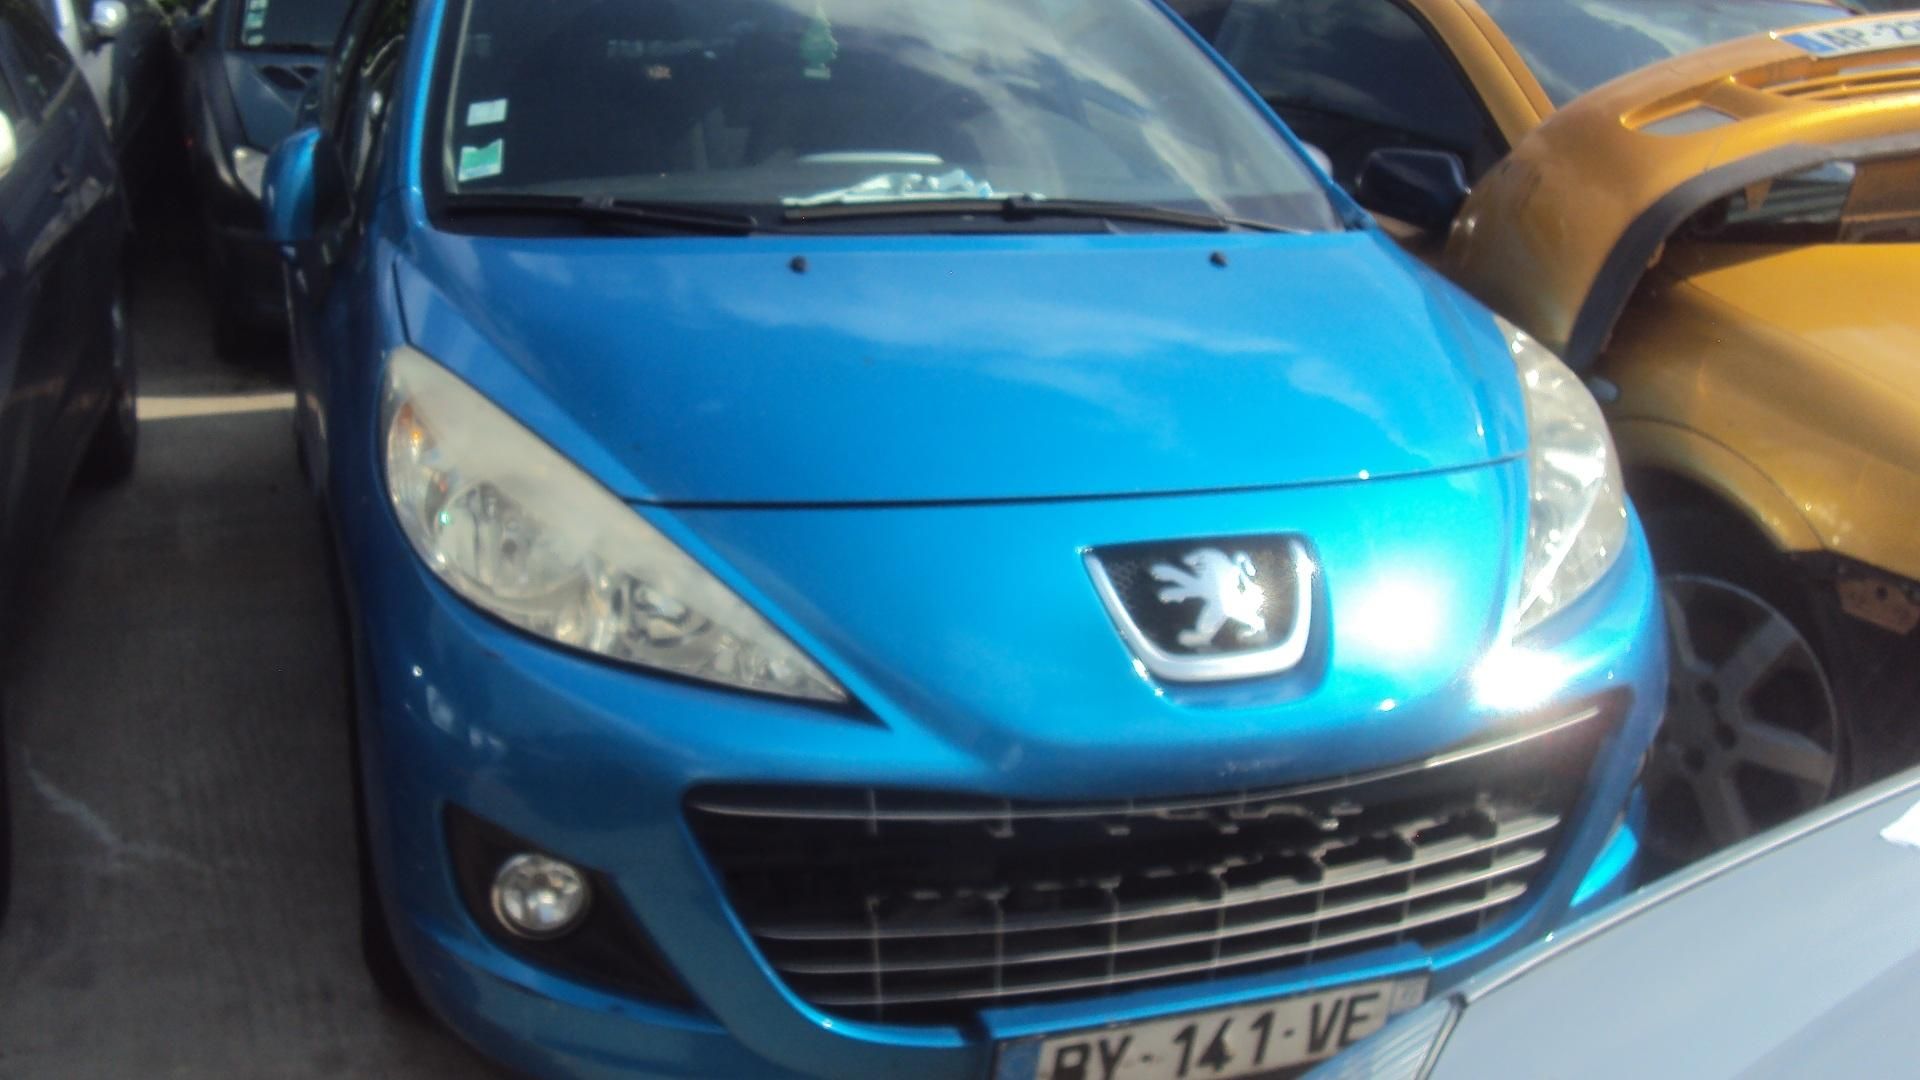 Null [RP][ACI] PEUGEOT 207 1.4 HDi 68 5 portes, Gazole, imm. BY-141-VE, type WC8&hellip;